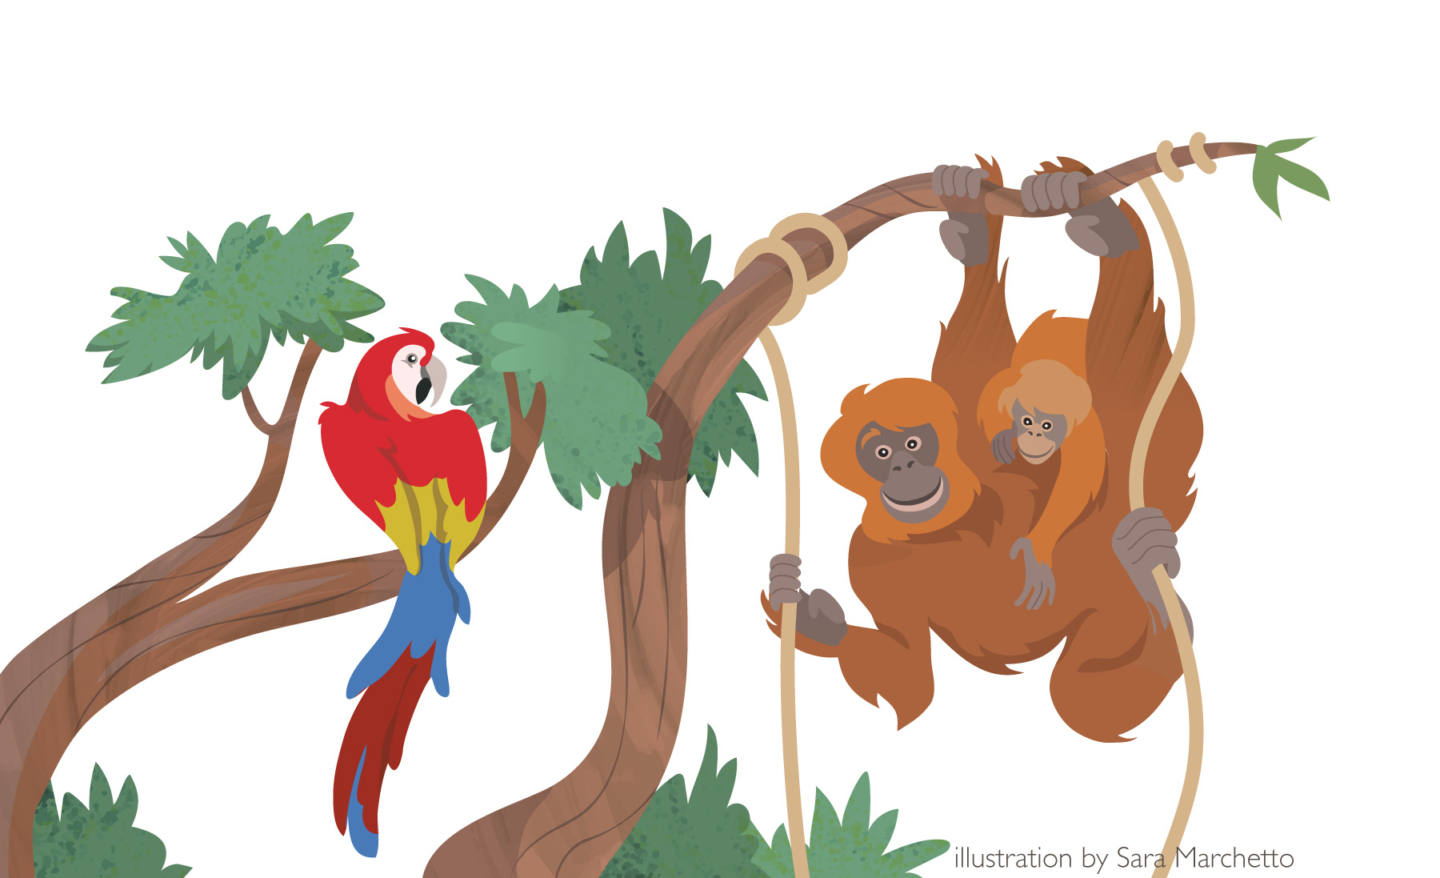 Vector illustration for children's book - education - orangutan mother and cub, red parrot over branches. flat and expressive style with texture - sara marchetto